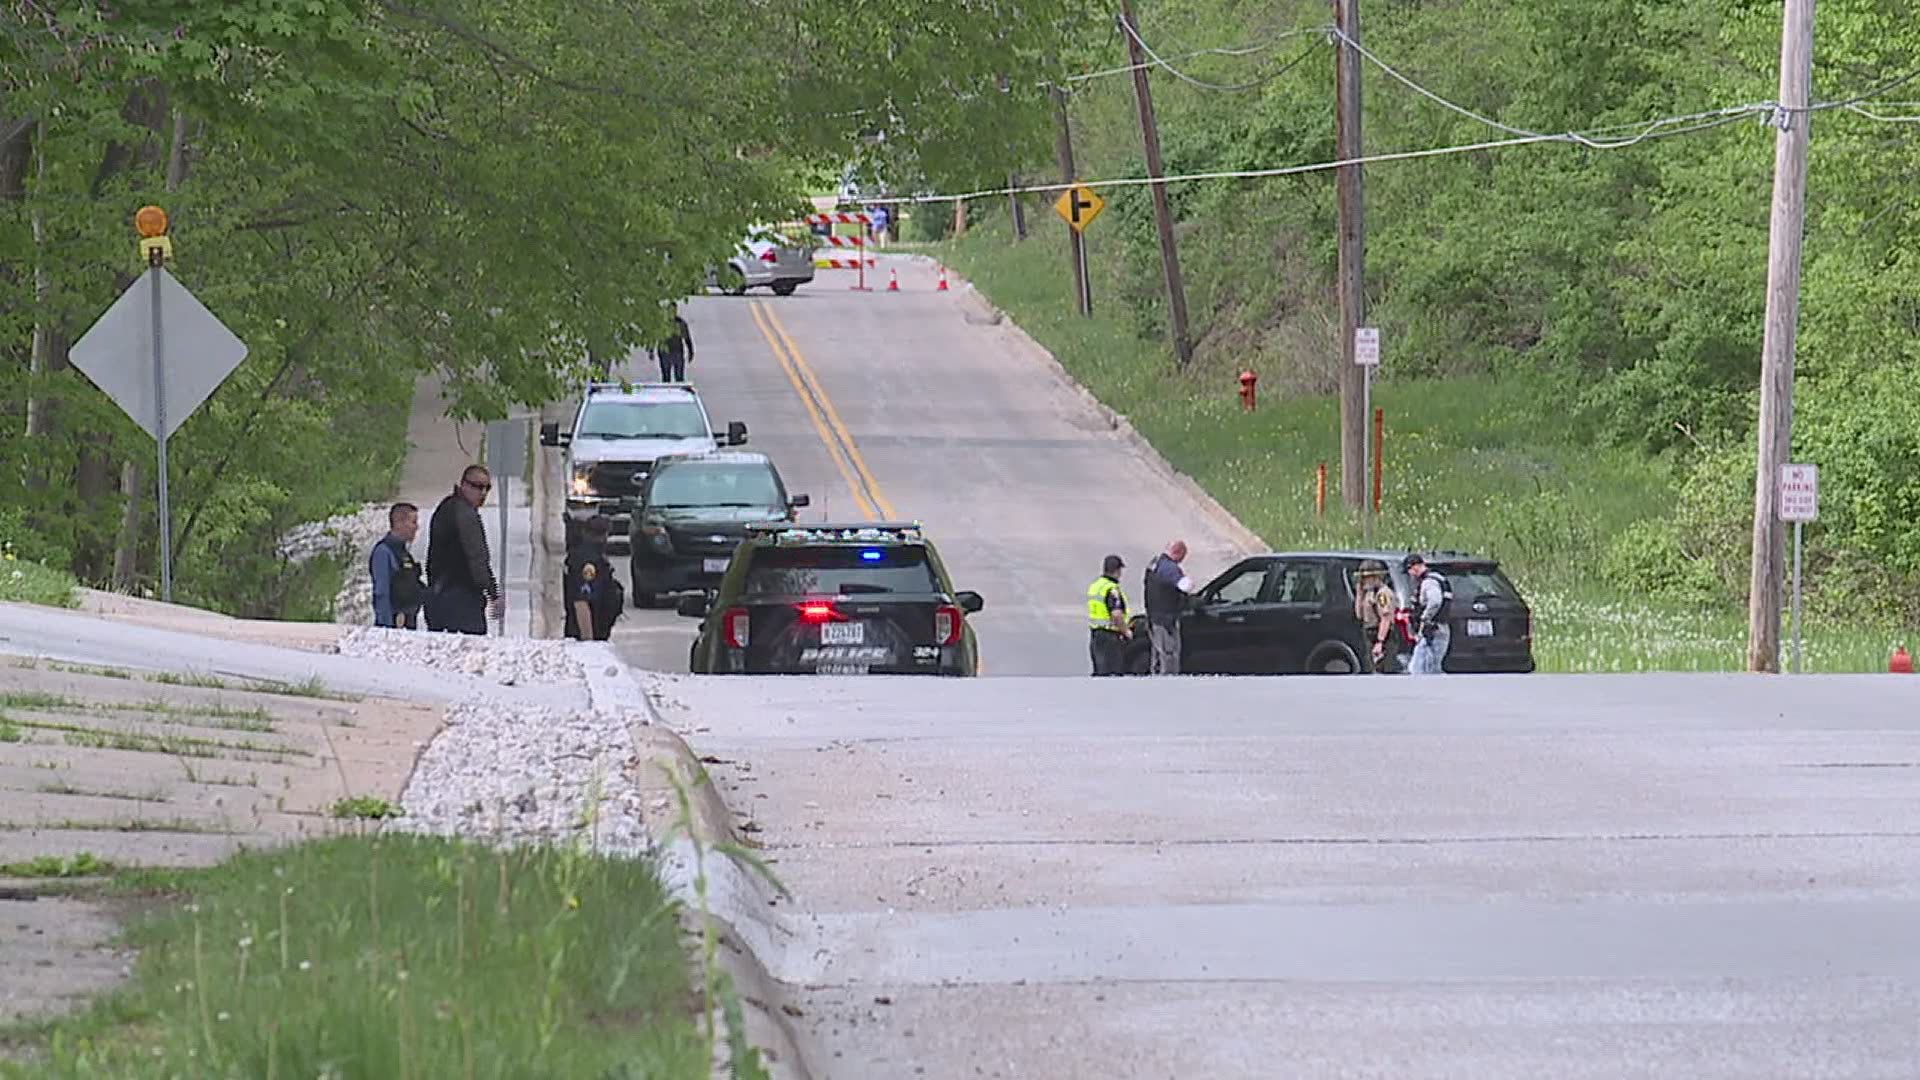 The Moline Police Department has revealed that an officer was responding to a call when a squad car hit a 13 year old bicyclist on 34th Street.